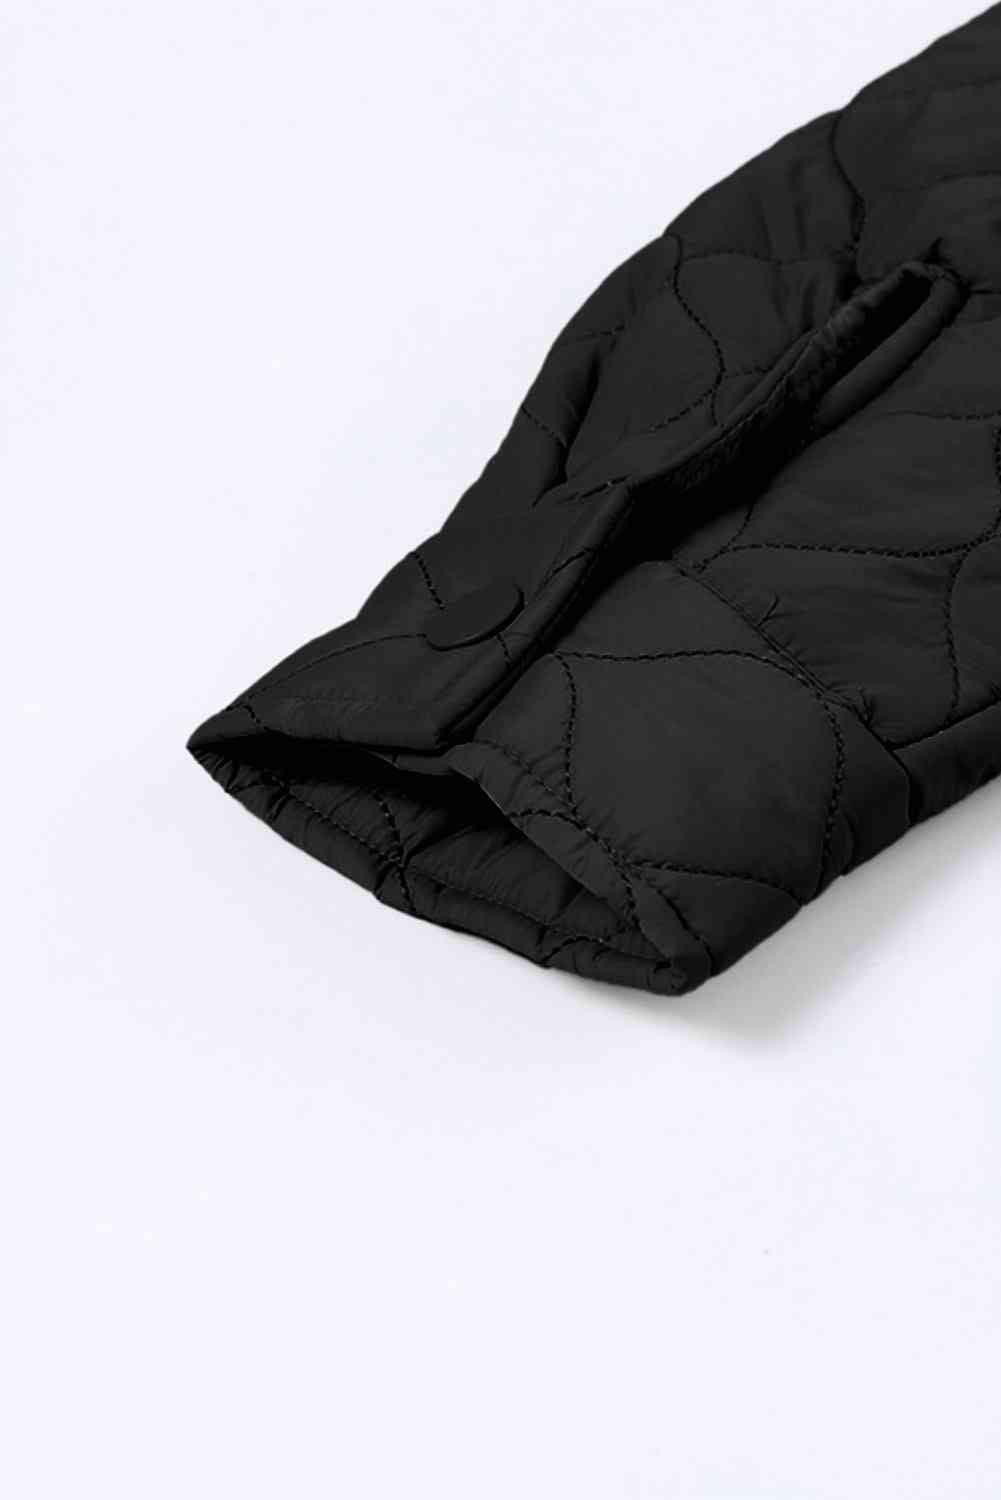 Snap Down Collared Winter Coat - Immenzive